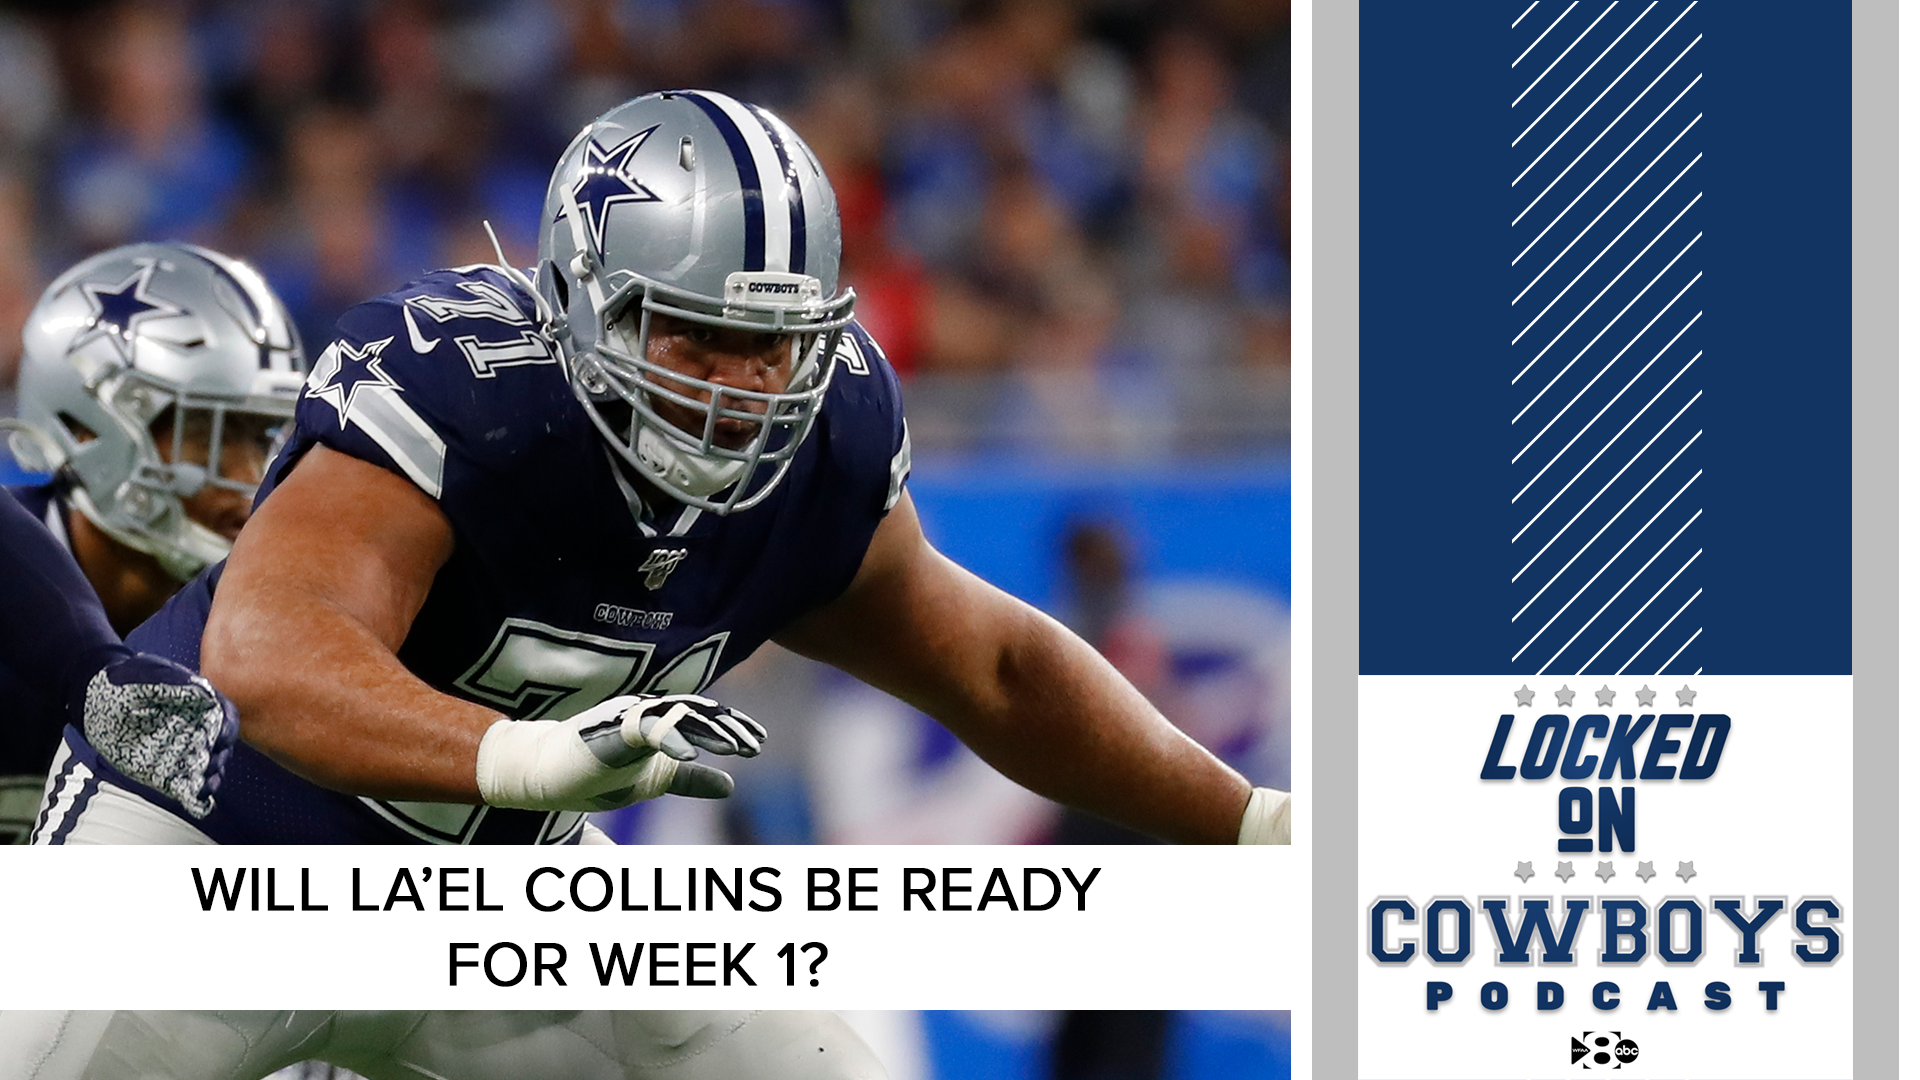 @Marcus_Mosher and @McCoolBCB discuss La'el Collins missing practice and if he will be available for the team's Week 1 game against the Bucs.